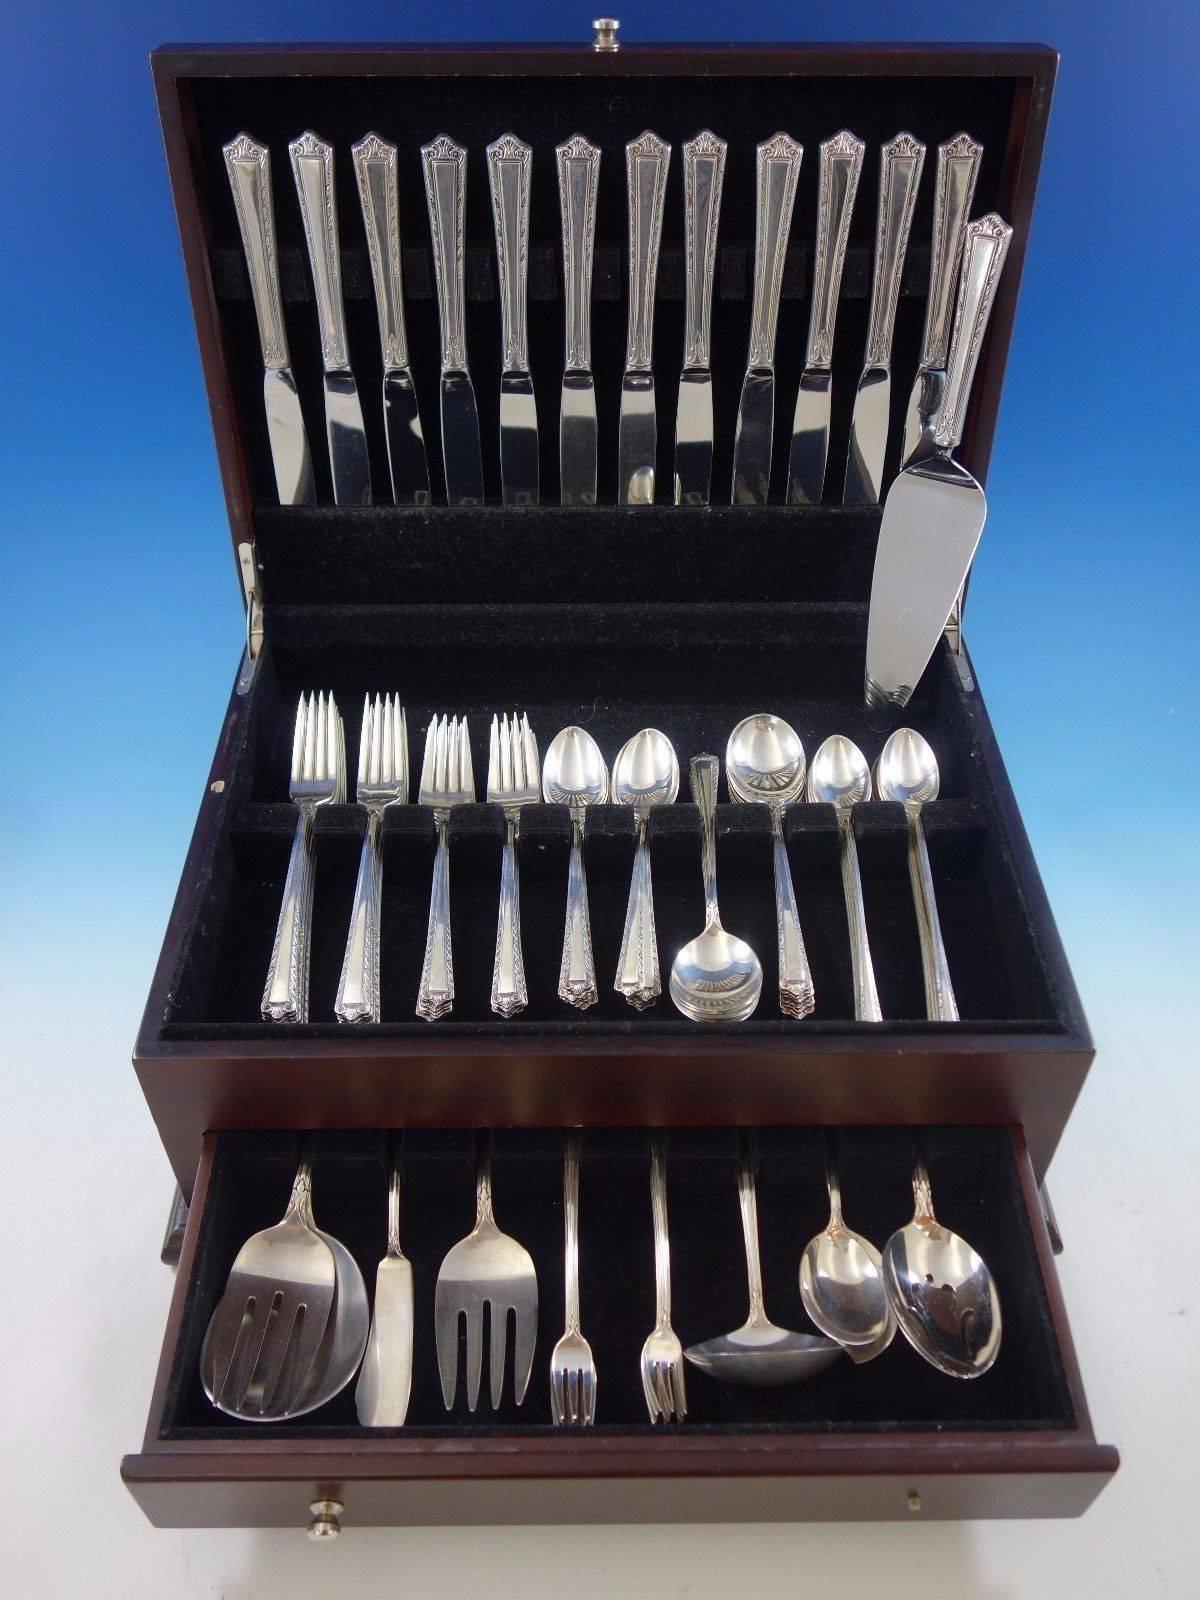 Processional by Fine Arts Internatinoal sterling silver flatware set of 94 pieces. This set includes: 

12 knives, 9 1/4